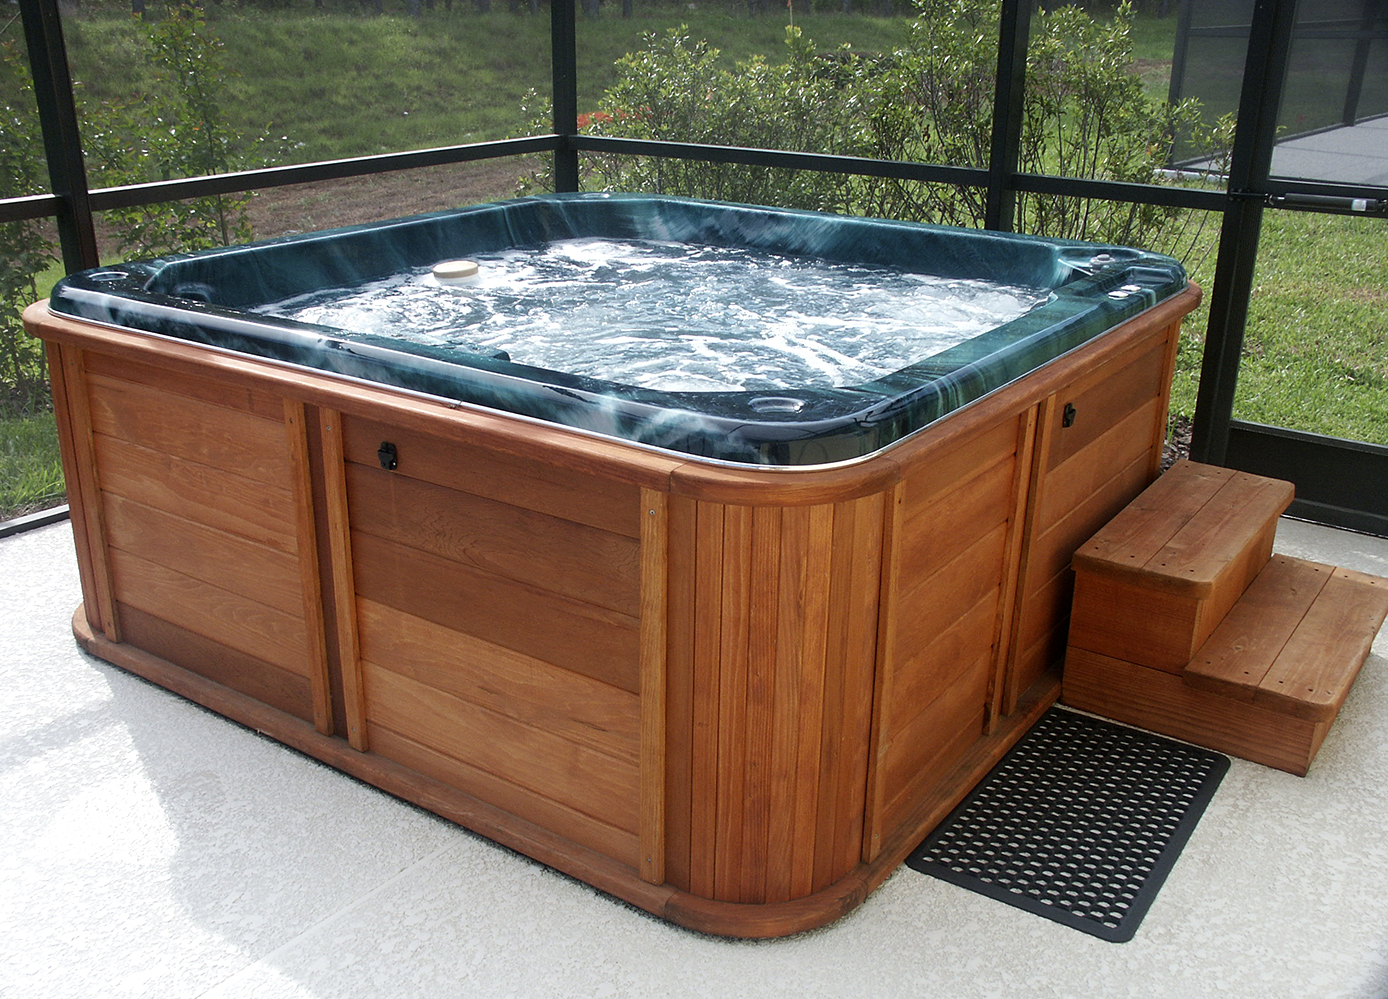 Skip the Hot Tub on Your Next Vacation - Good Times.